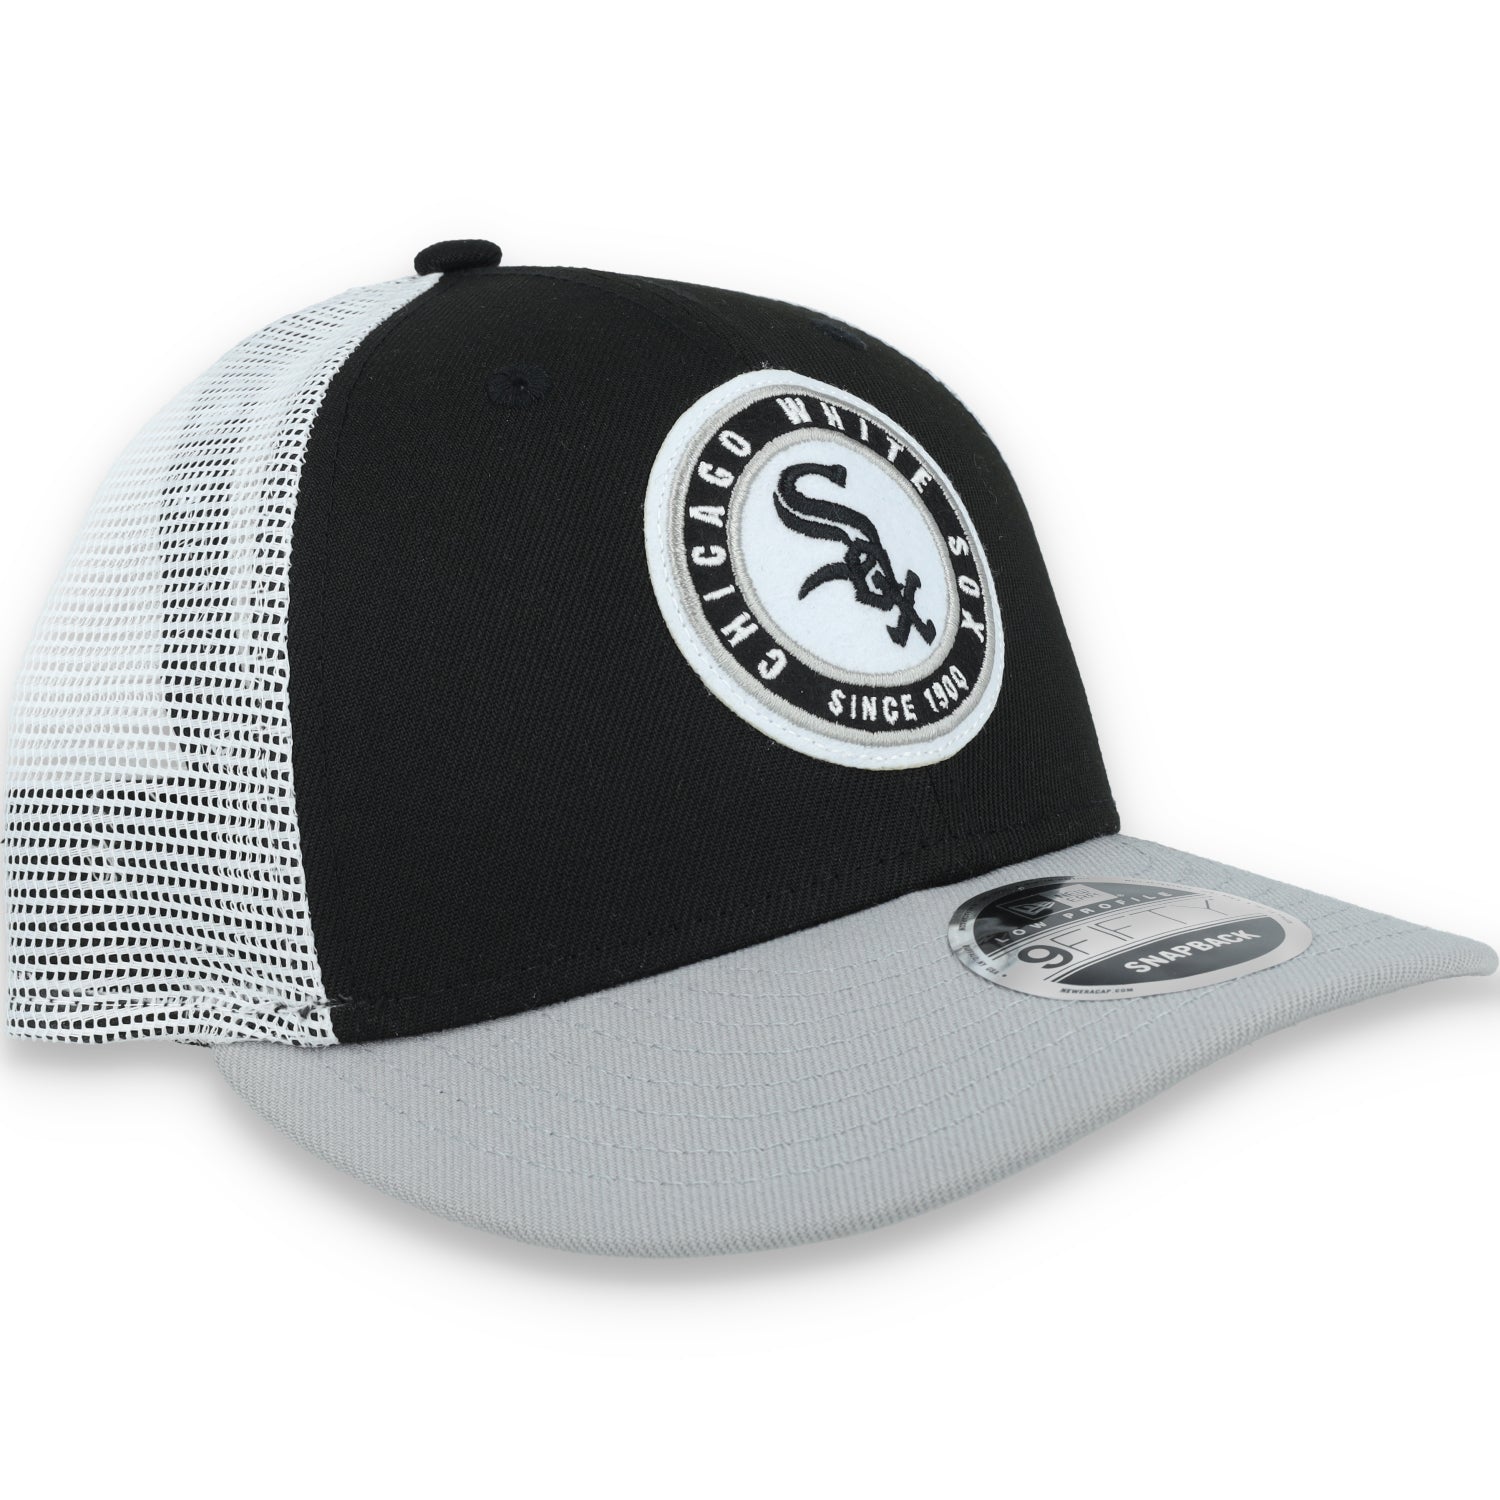 New Era Chicago White Sox Throwback Low Profile 9FIFTY Trucker Snapback Hat